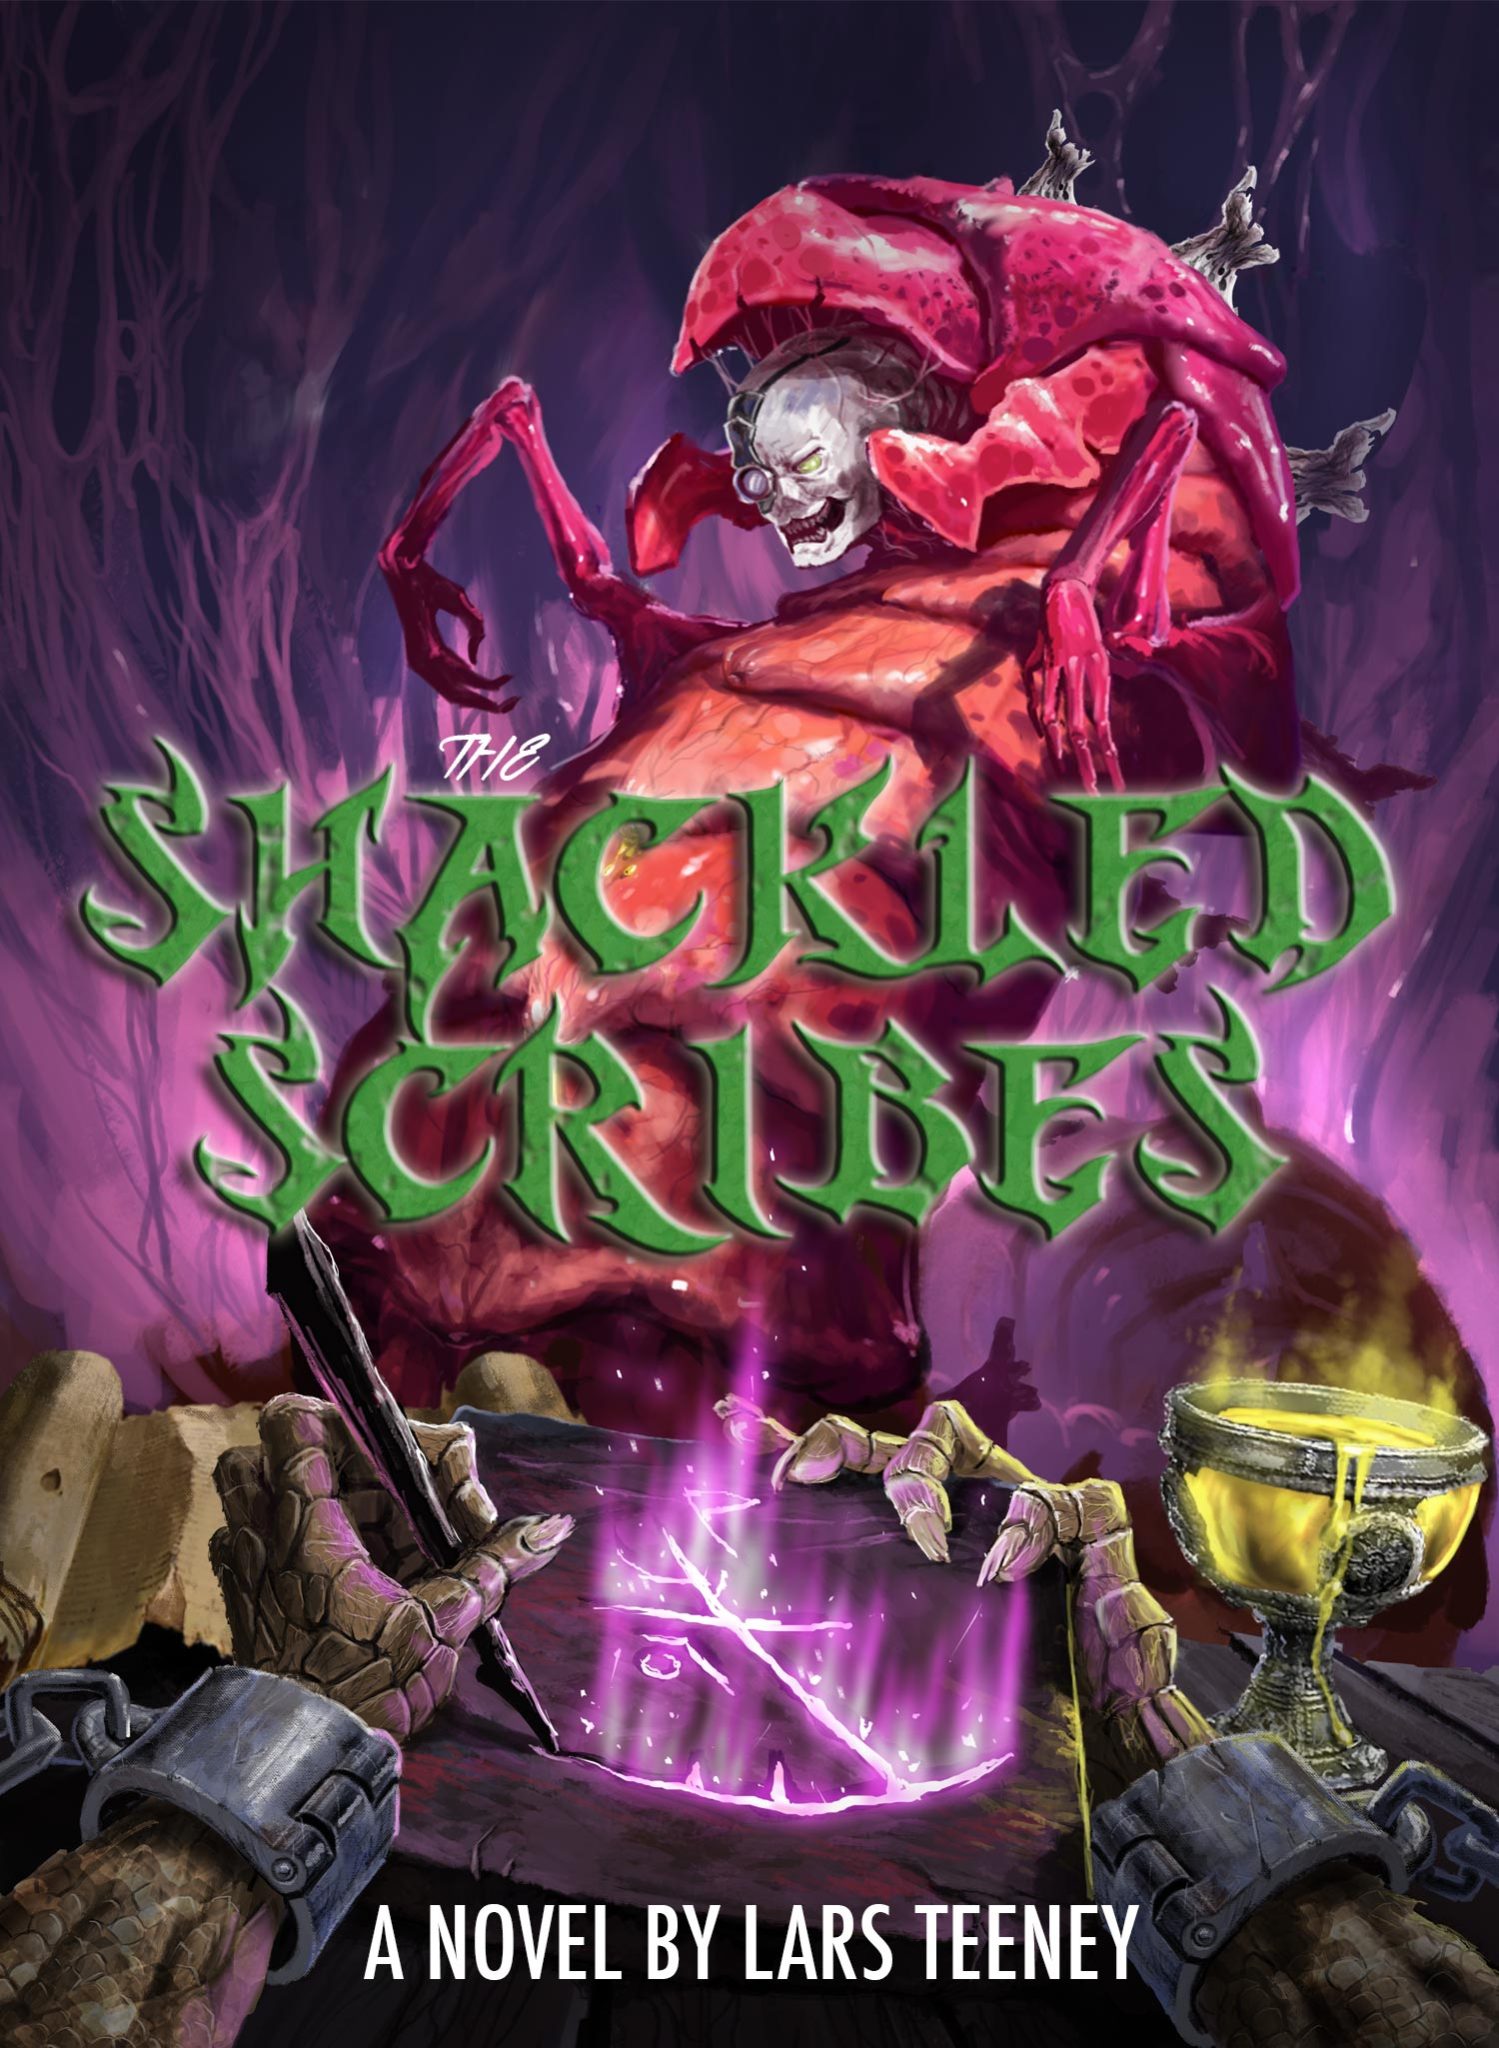 FREE: The Shackled Scribes by Lars Teeney